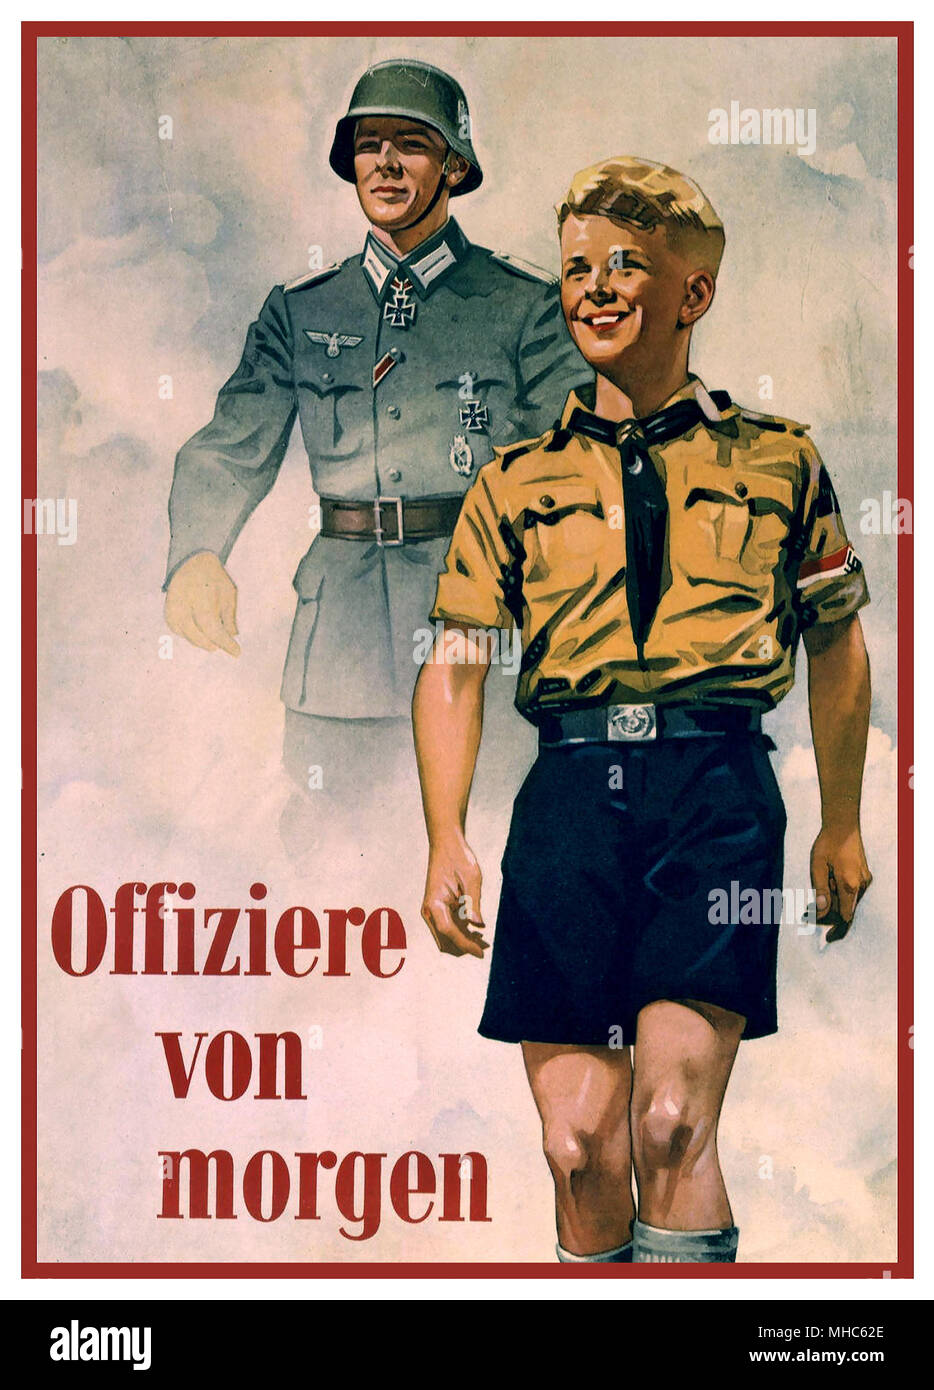 ‘OFFIZIERE VON MORGEN’ 1940 Vintage Nazi Germany Recruitment Propaganda Poster 'Officers of Tomorrow' featuring Wehrmacht iron cross medal decorated soldier and a Hitler Youth Boy with Swastika armband Stock Photo